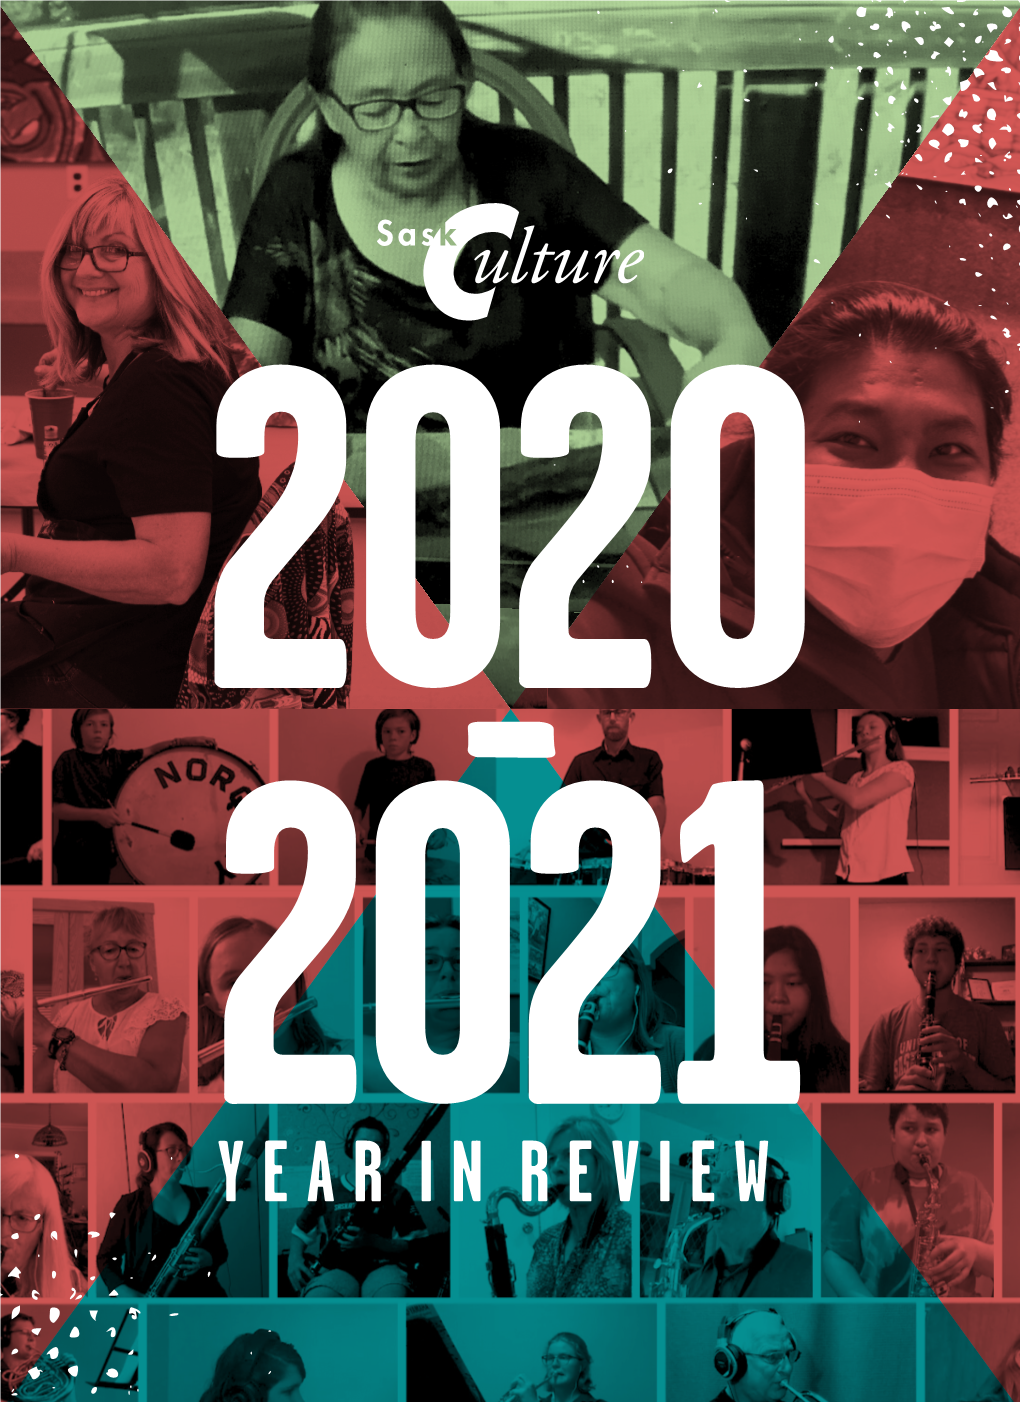 Year in Review 2020/21 Saskculture Year in Review